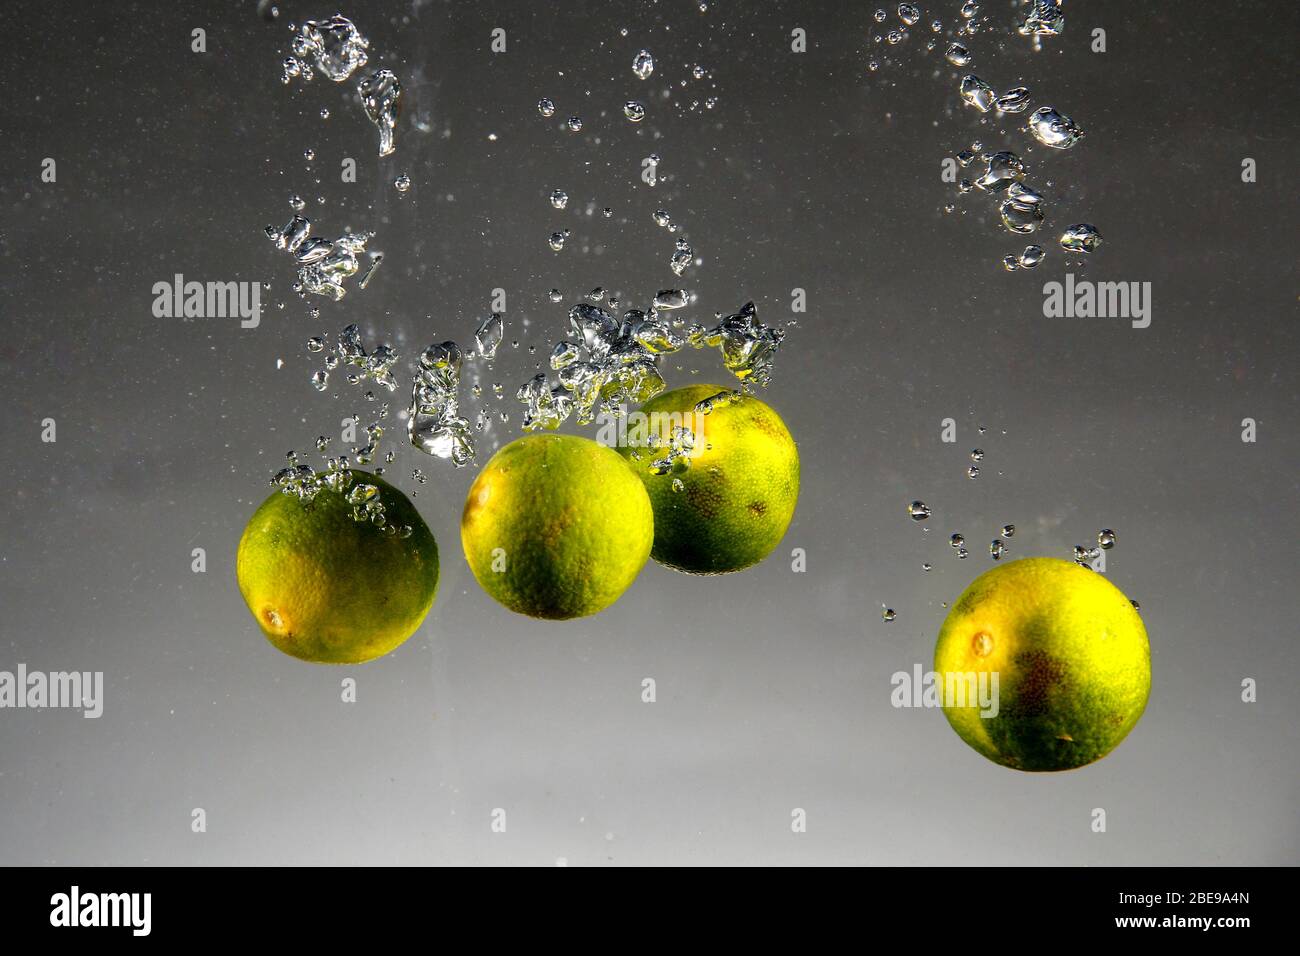 Photo of Calamondin or Philippine lime or calamansi dropped in water Stock Photo